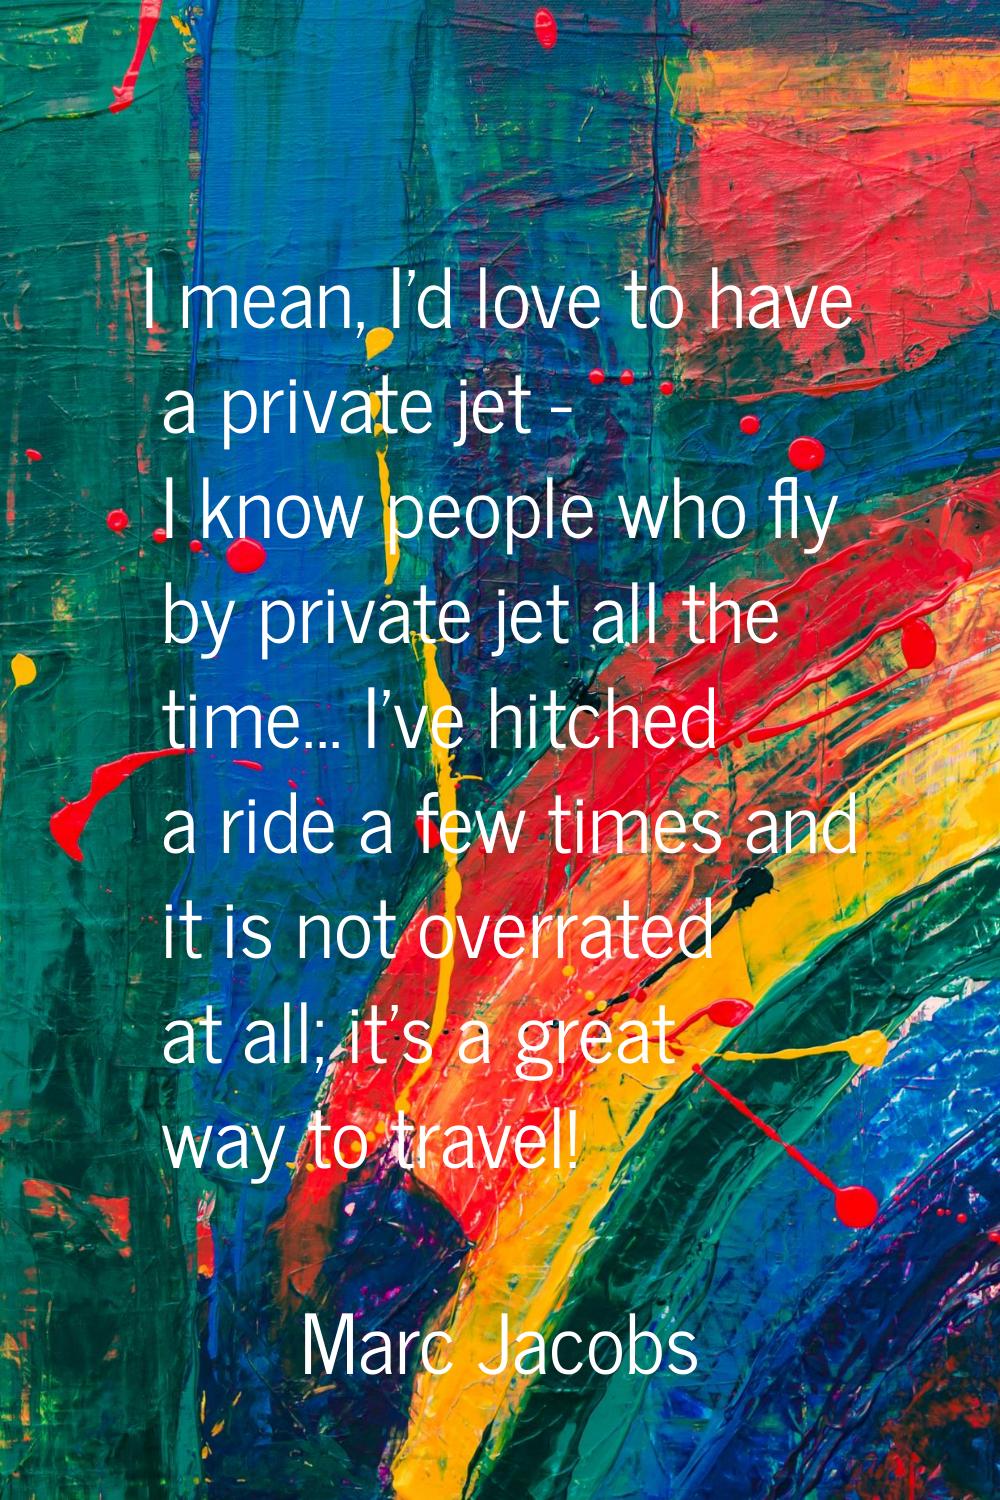 I mean, I'd love to have a private jet - I know people who fly by private jet all the time... I've 